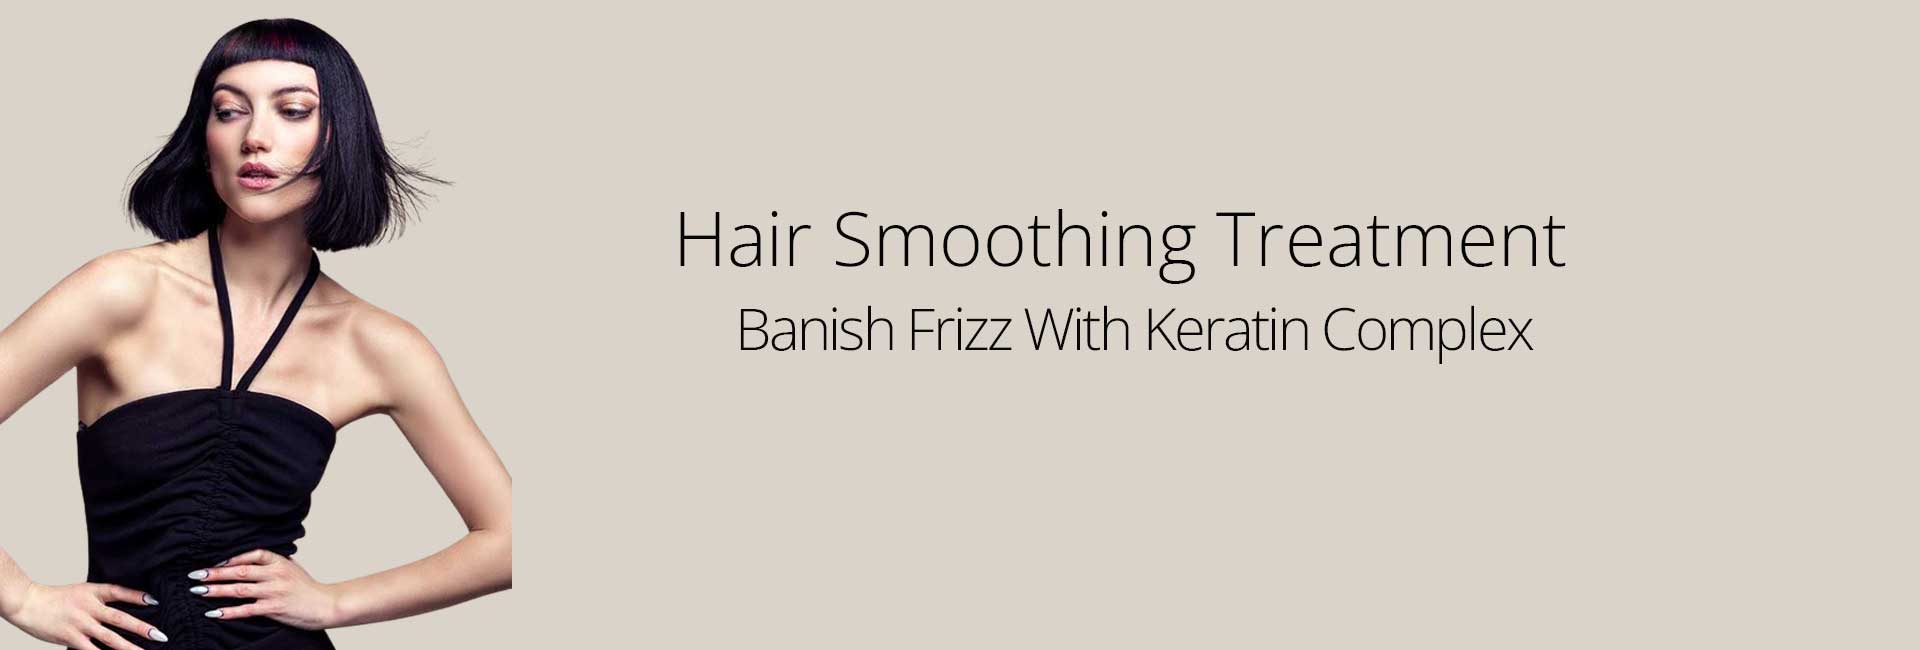 Hair Smoothing Treatment The Norths Inspirational Award Winning Salon Group